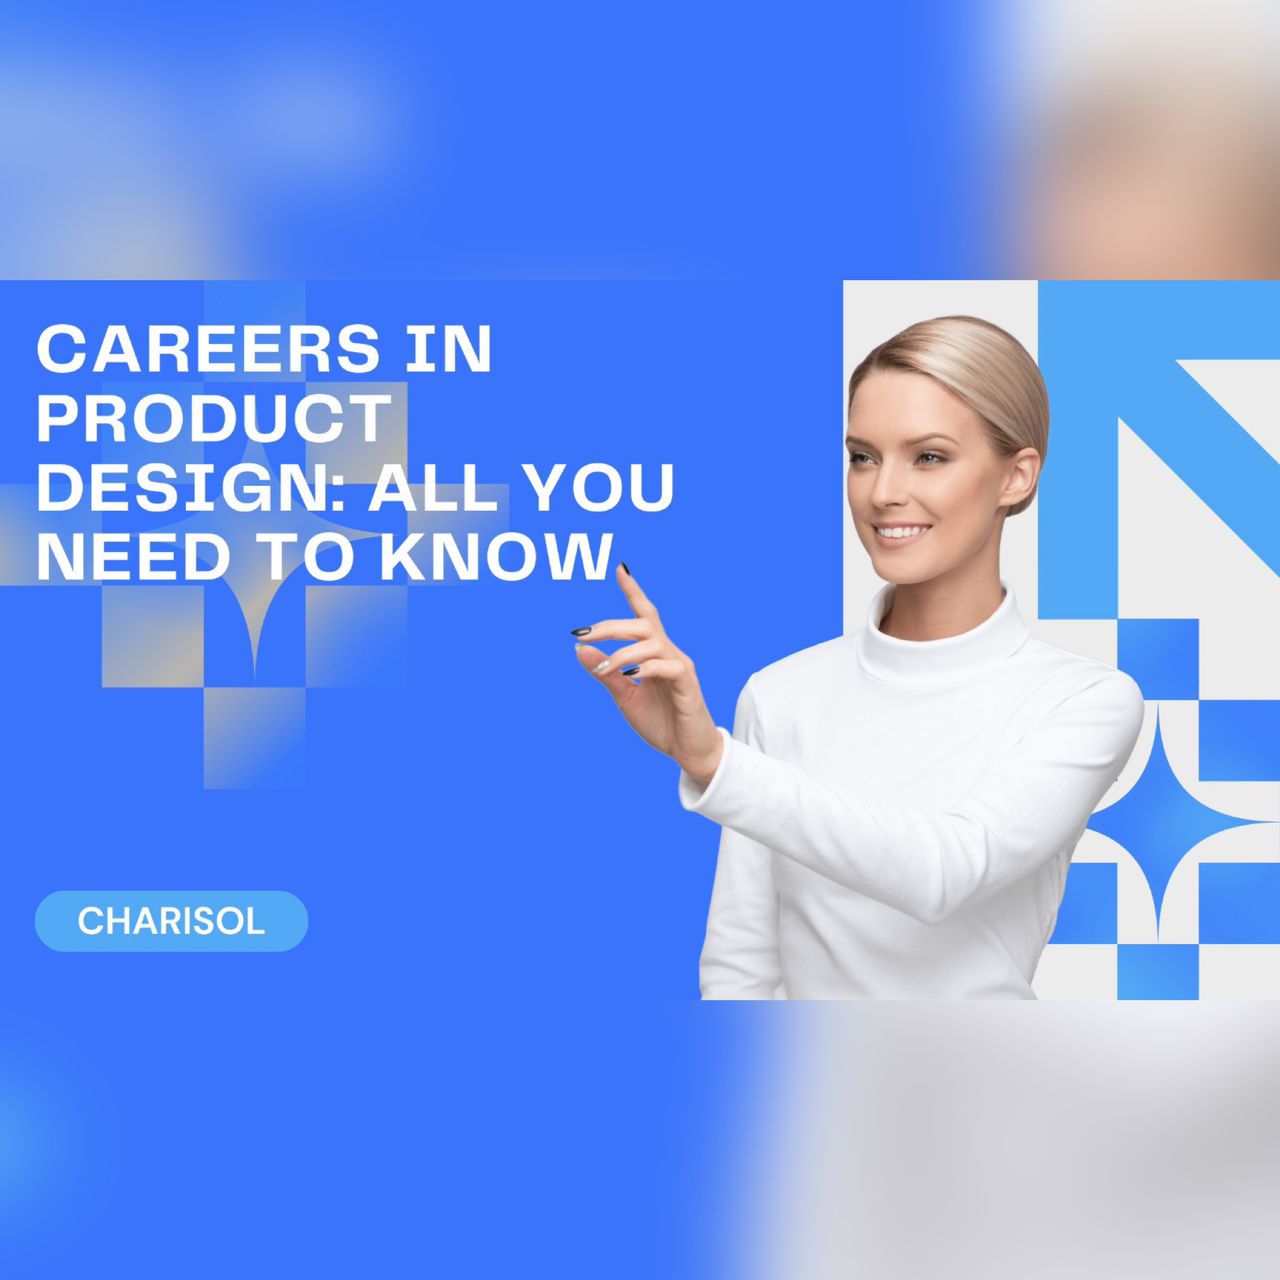 Careers in product design: All you need to know